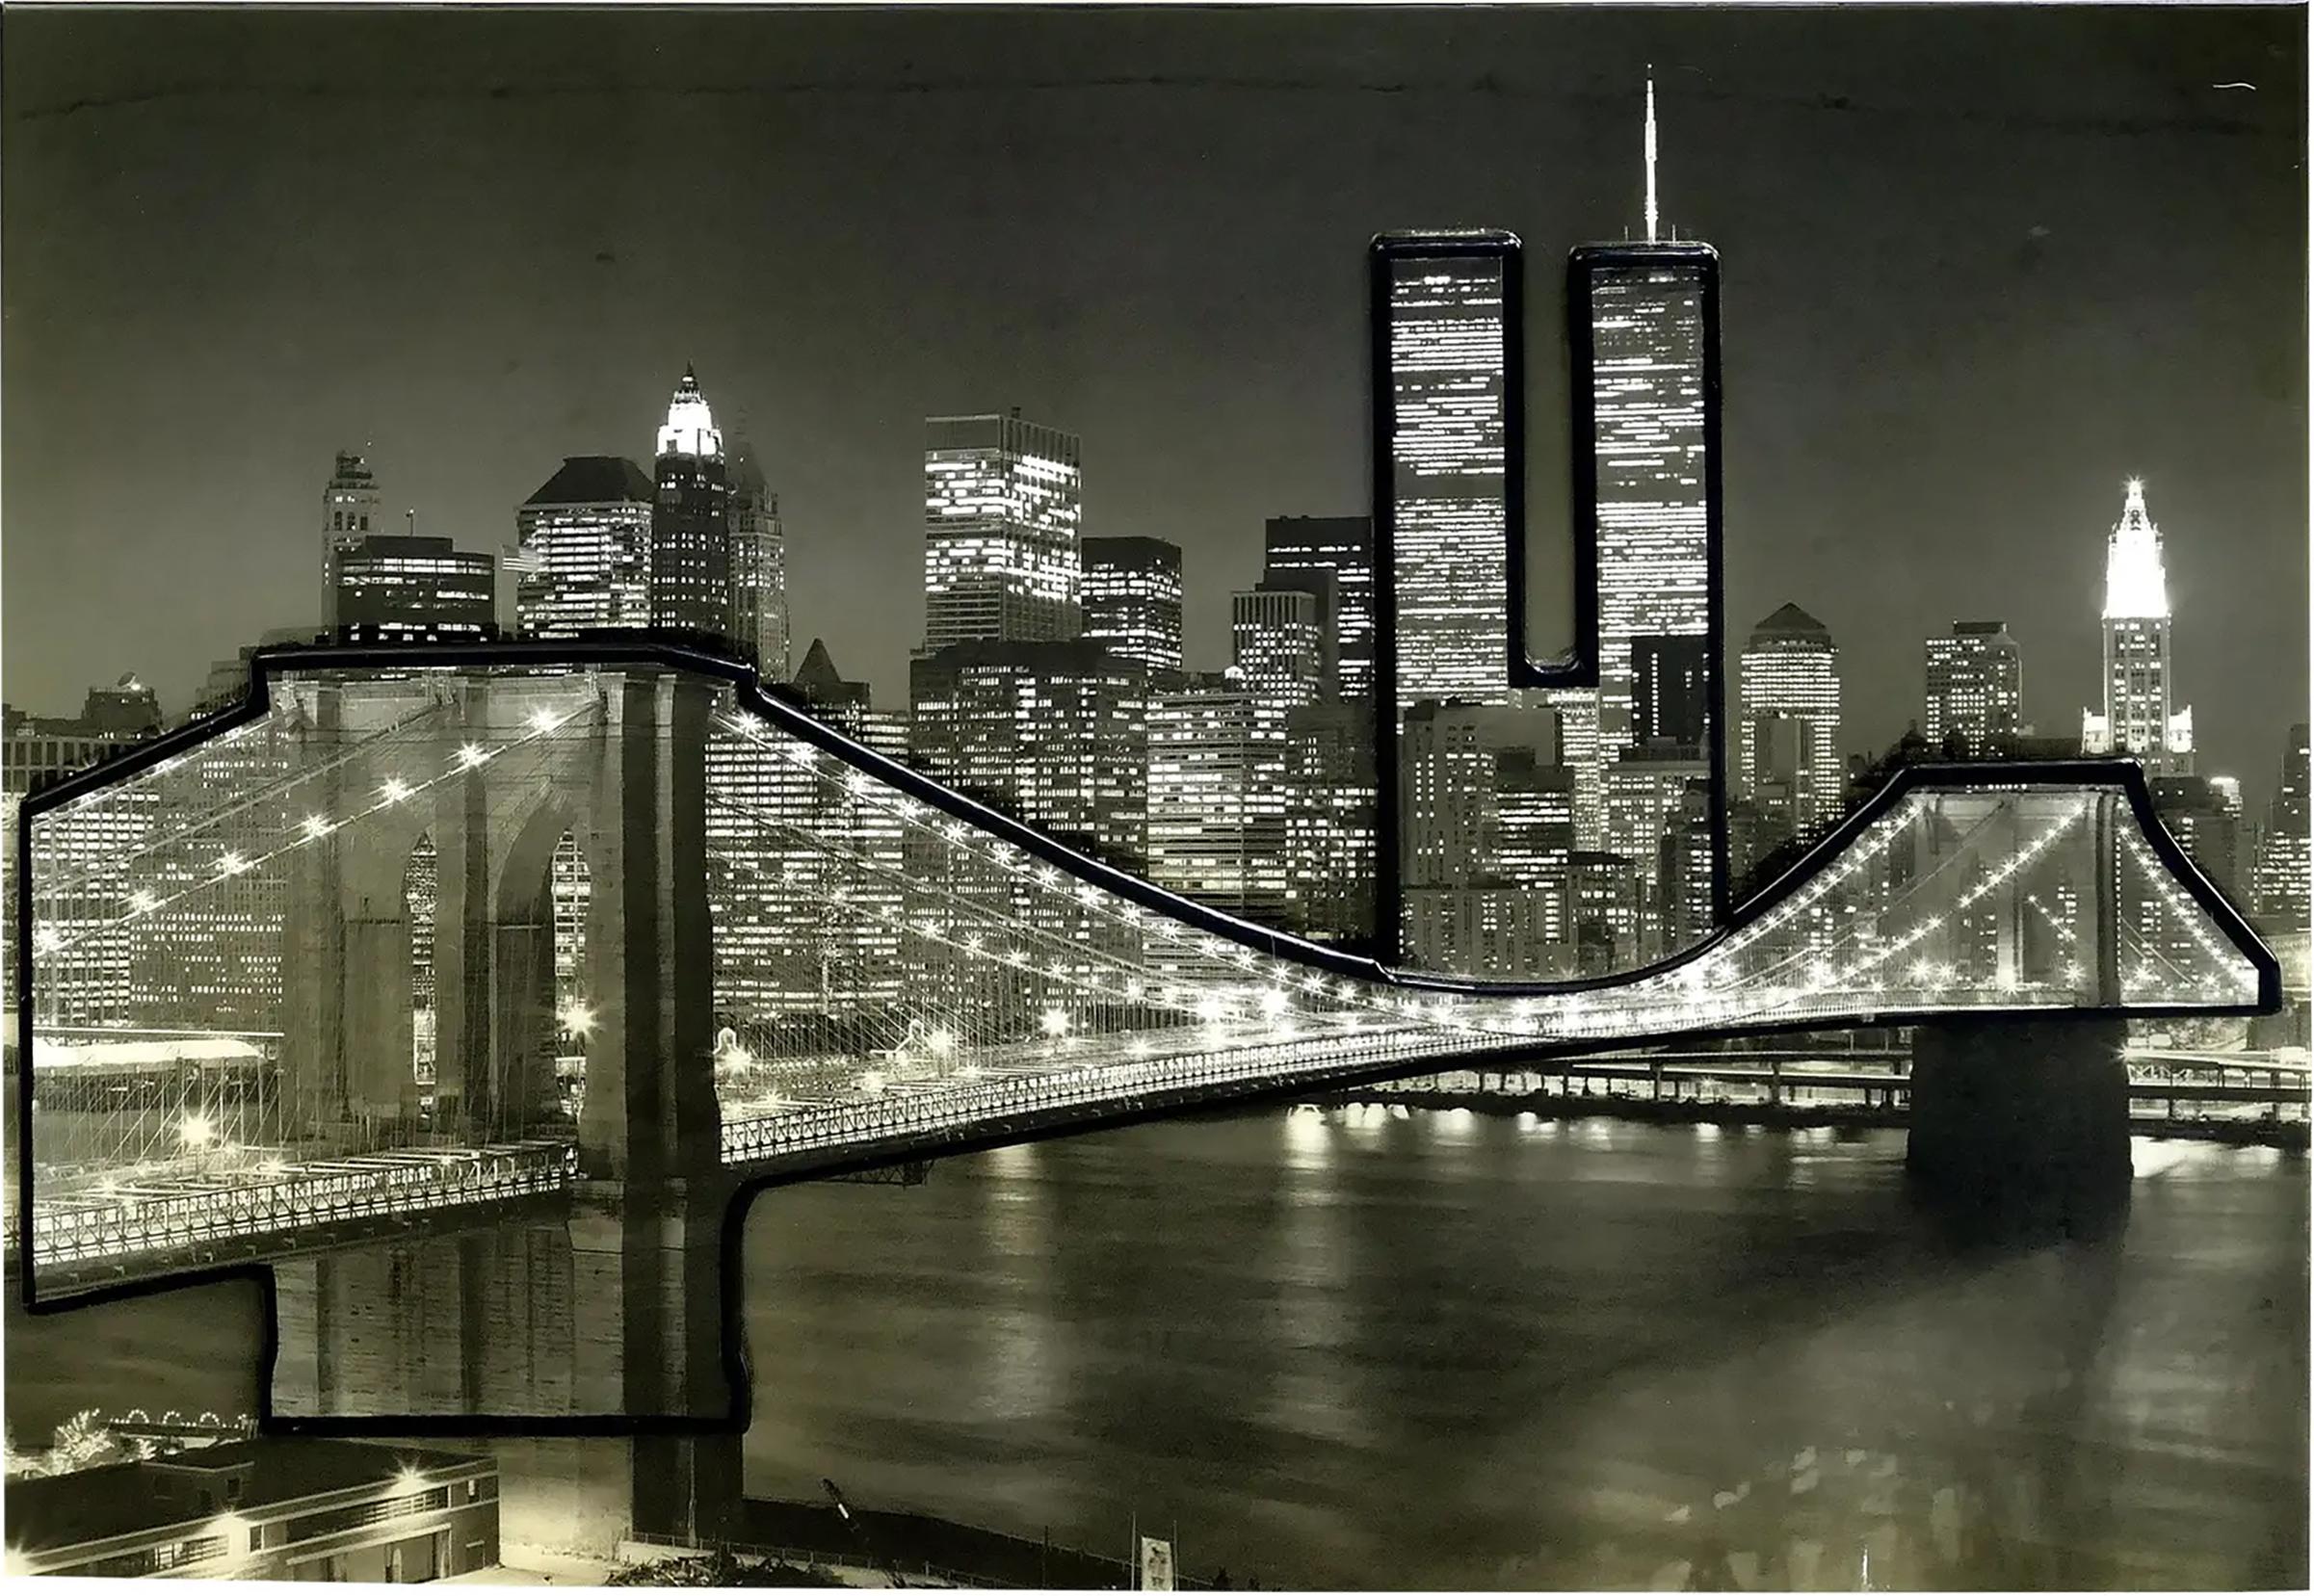 




Framed Three Dimensional New York City Skyline Photograph with the Twin Towers 

Offered for sale is a framed overscale black and white photograph of New York City with the Brooklyn Bridge and a view of the Twin Towers in the distance. Portions